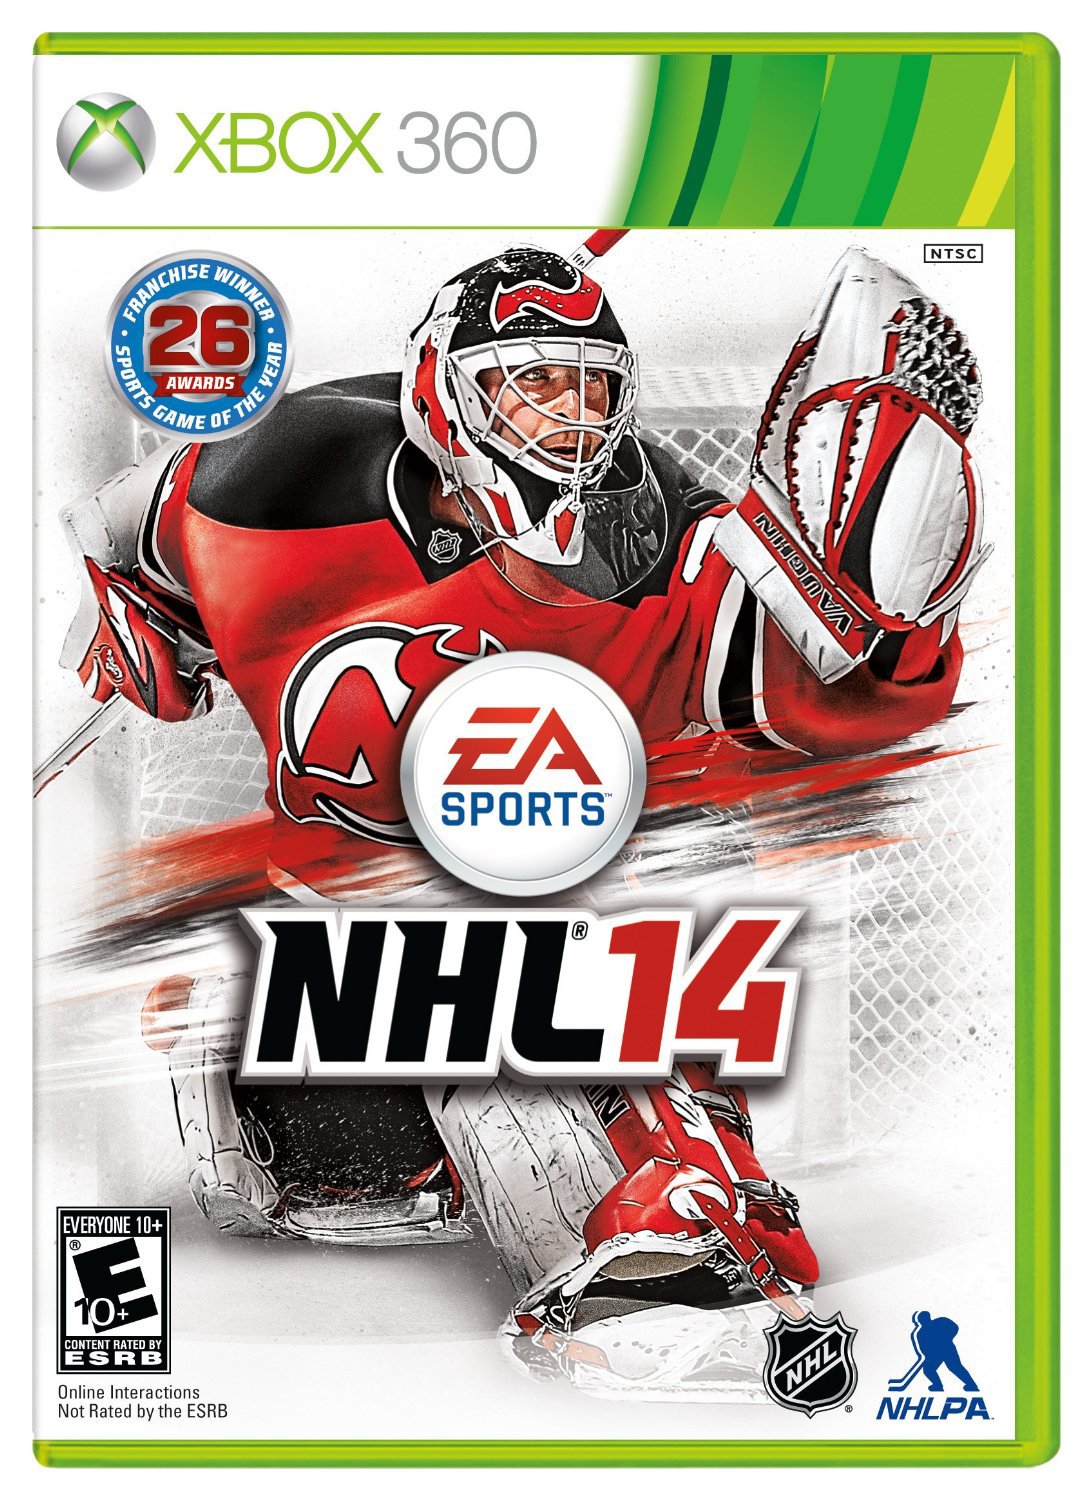 NHL 2013 Stanley Cup Edition